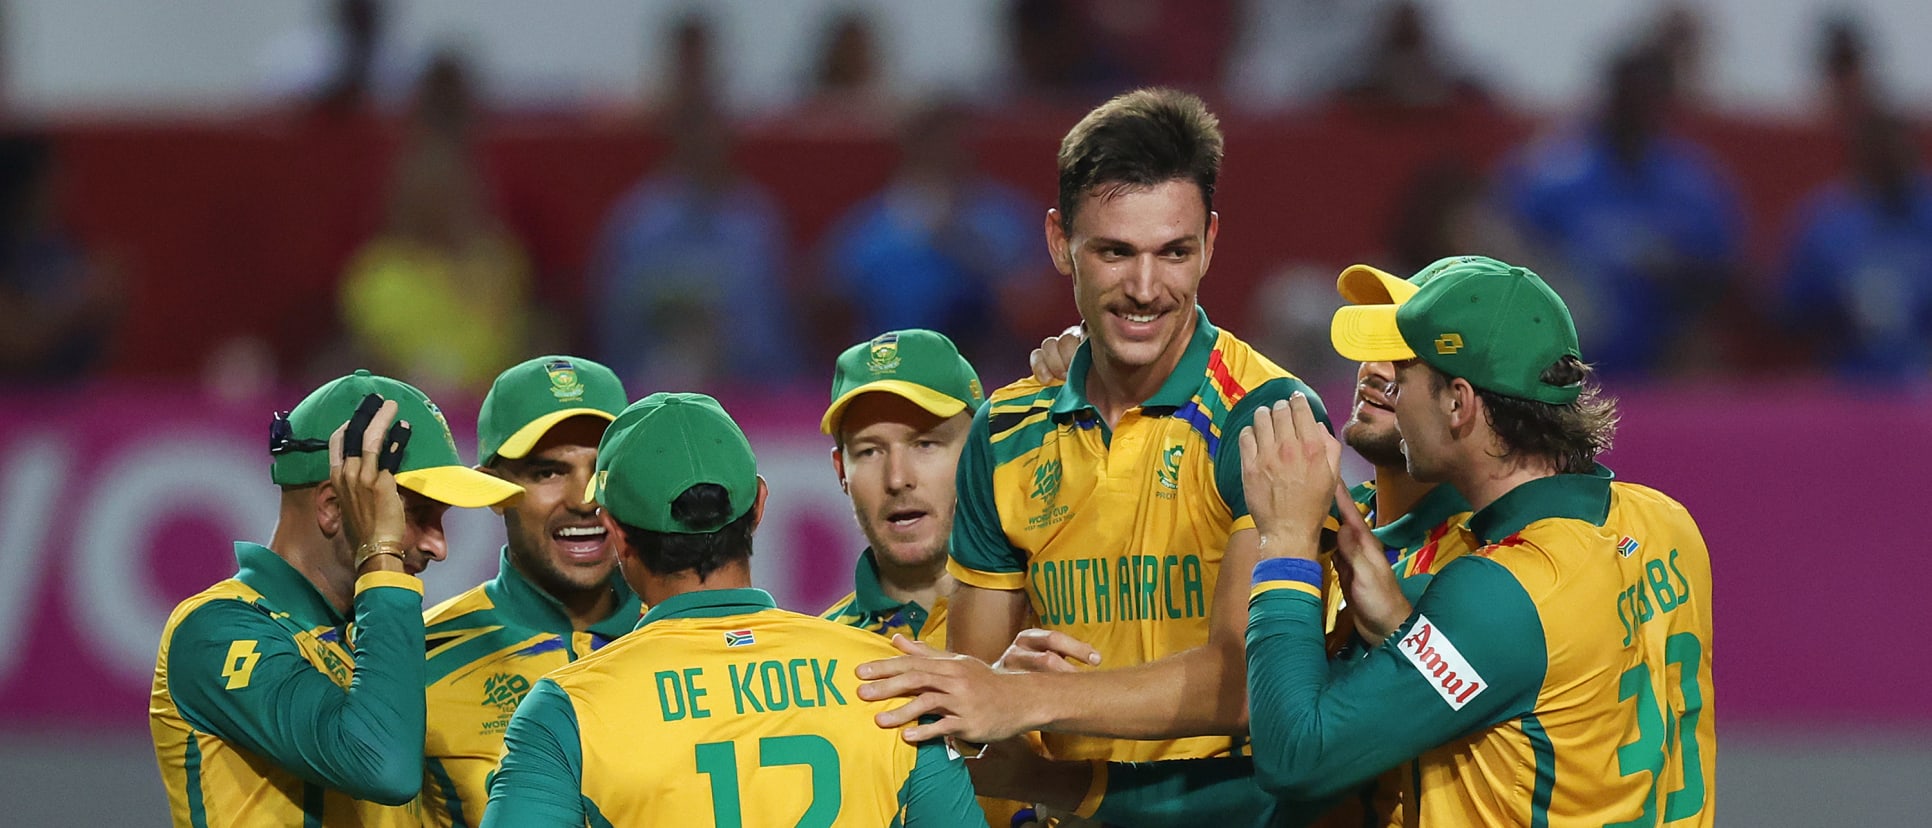 South Africa reaches first ever men’s World Cup final